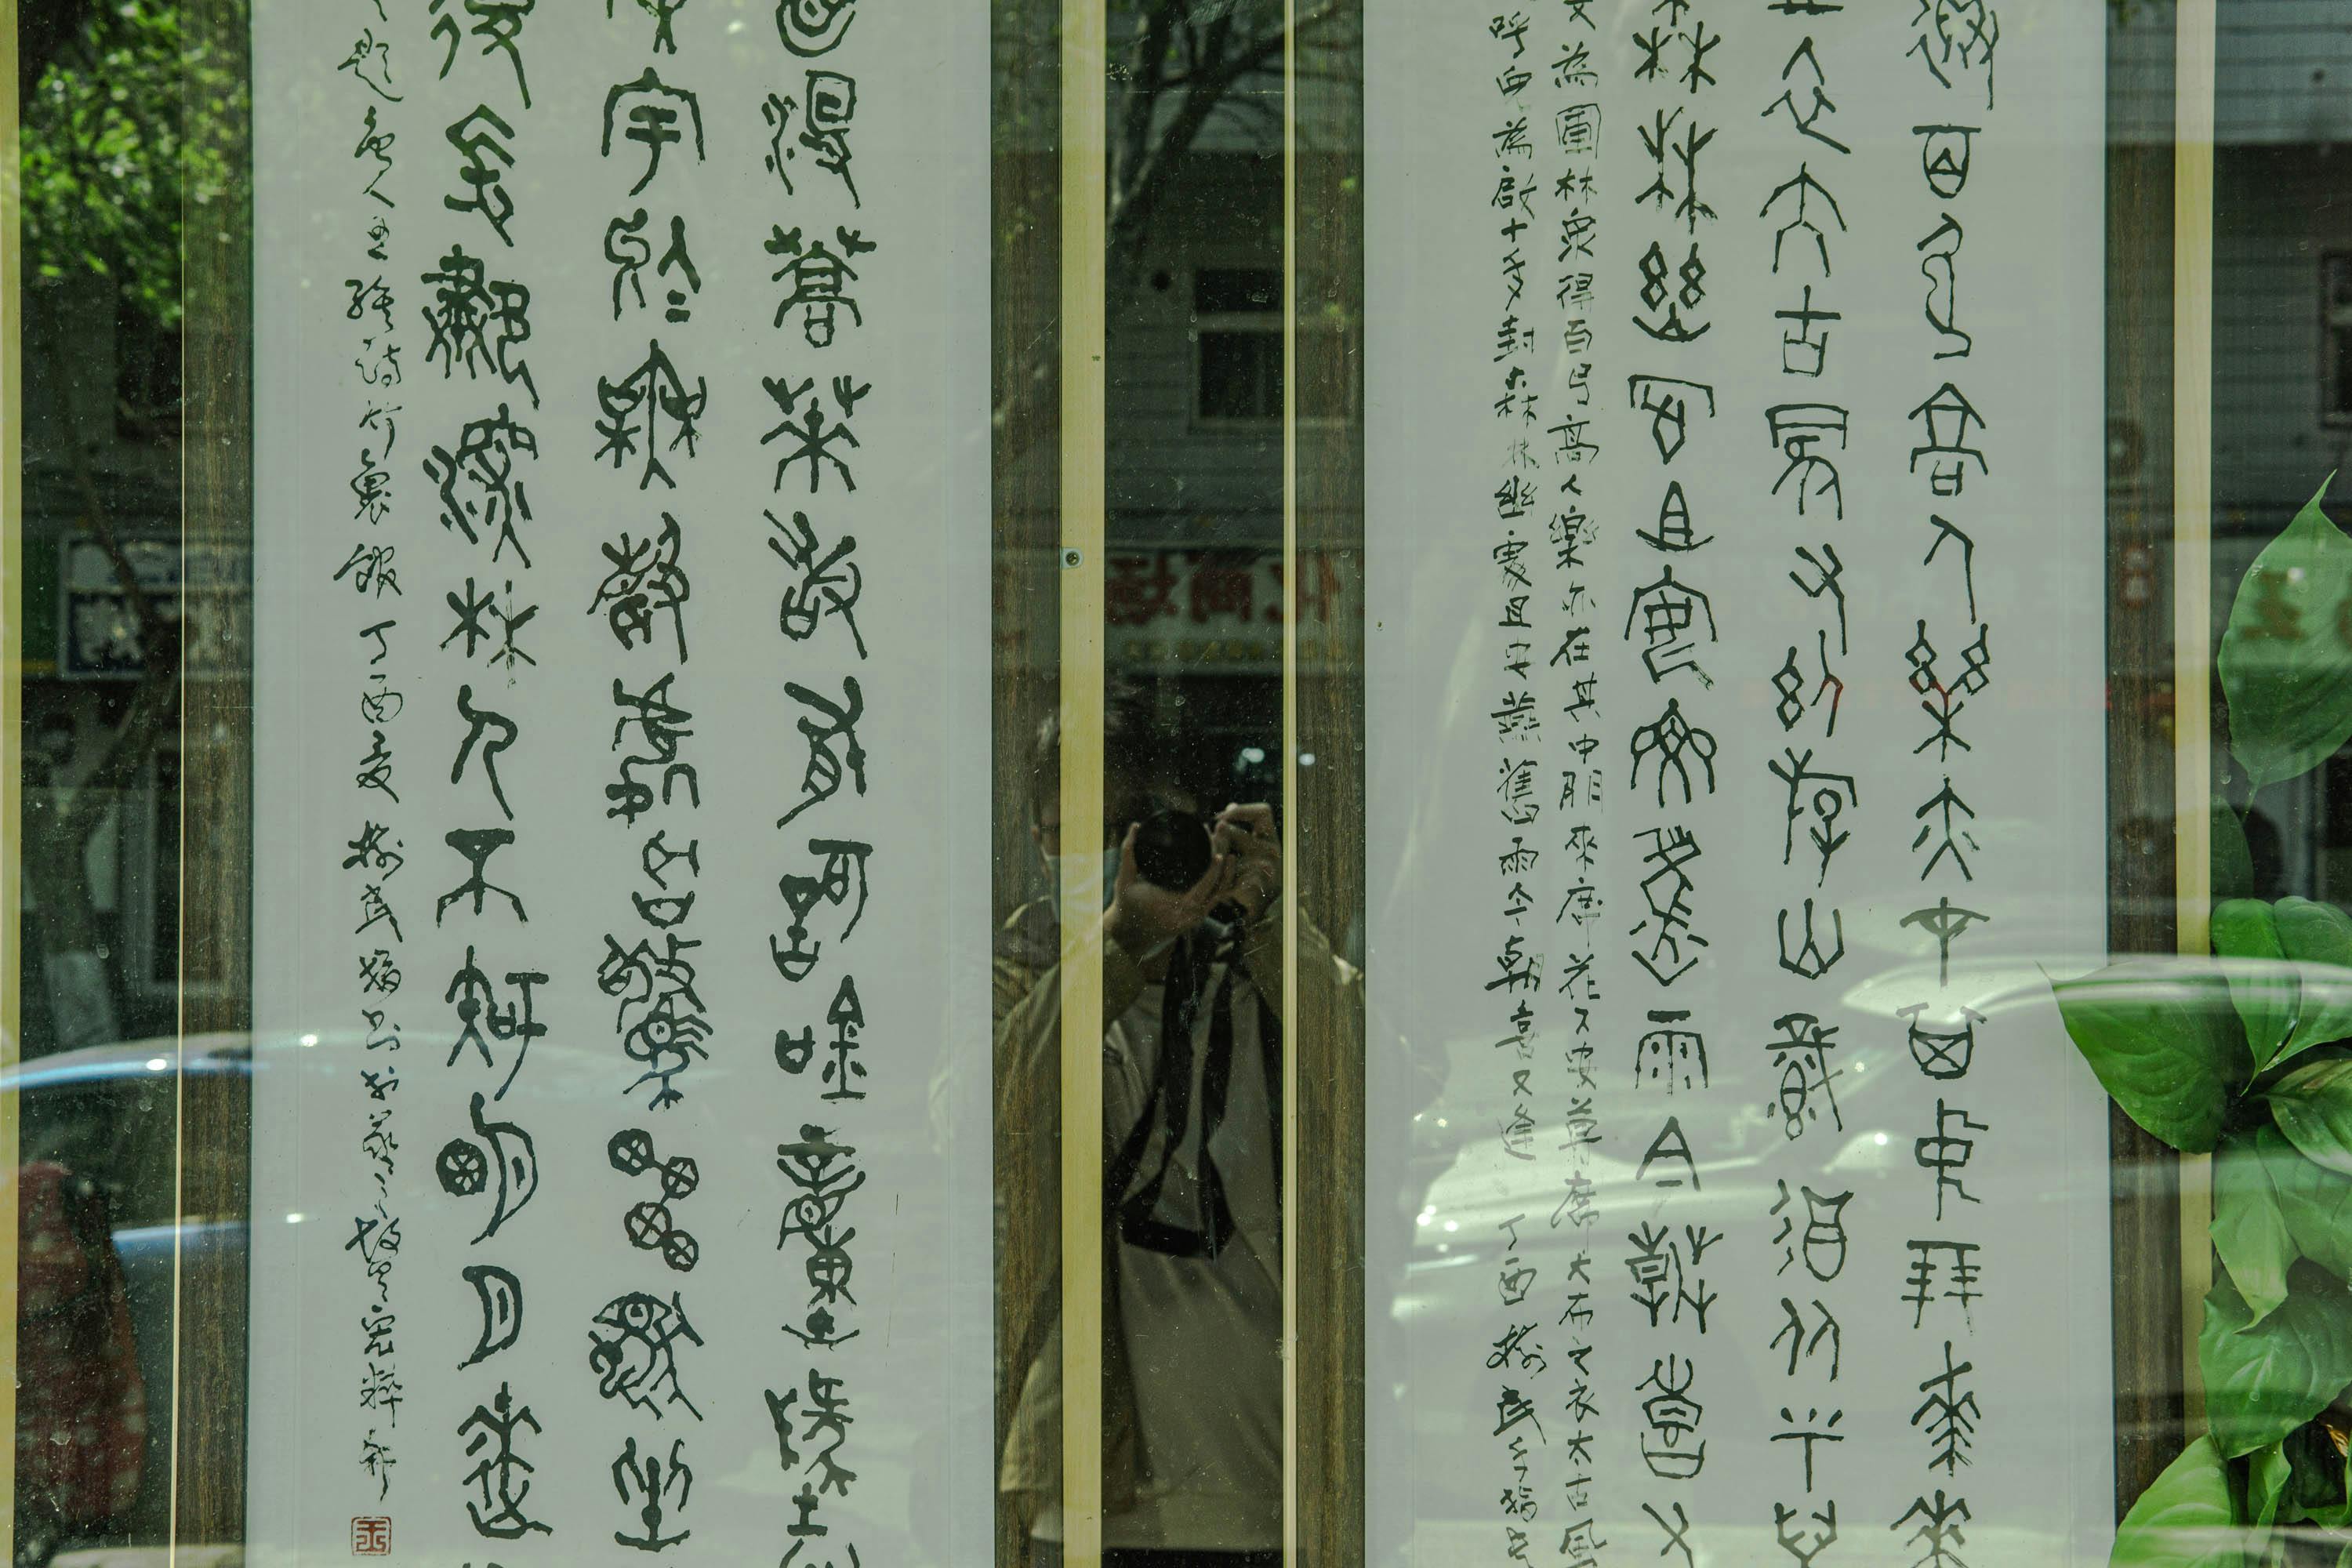 The reflection of a calligraphy store's window